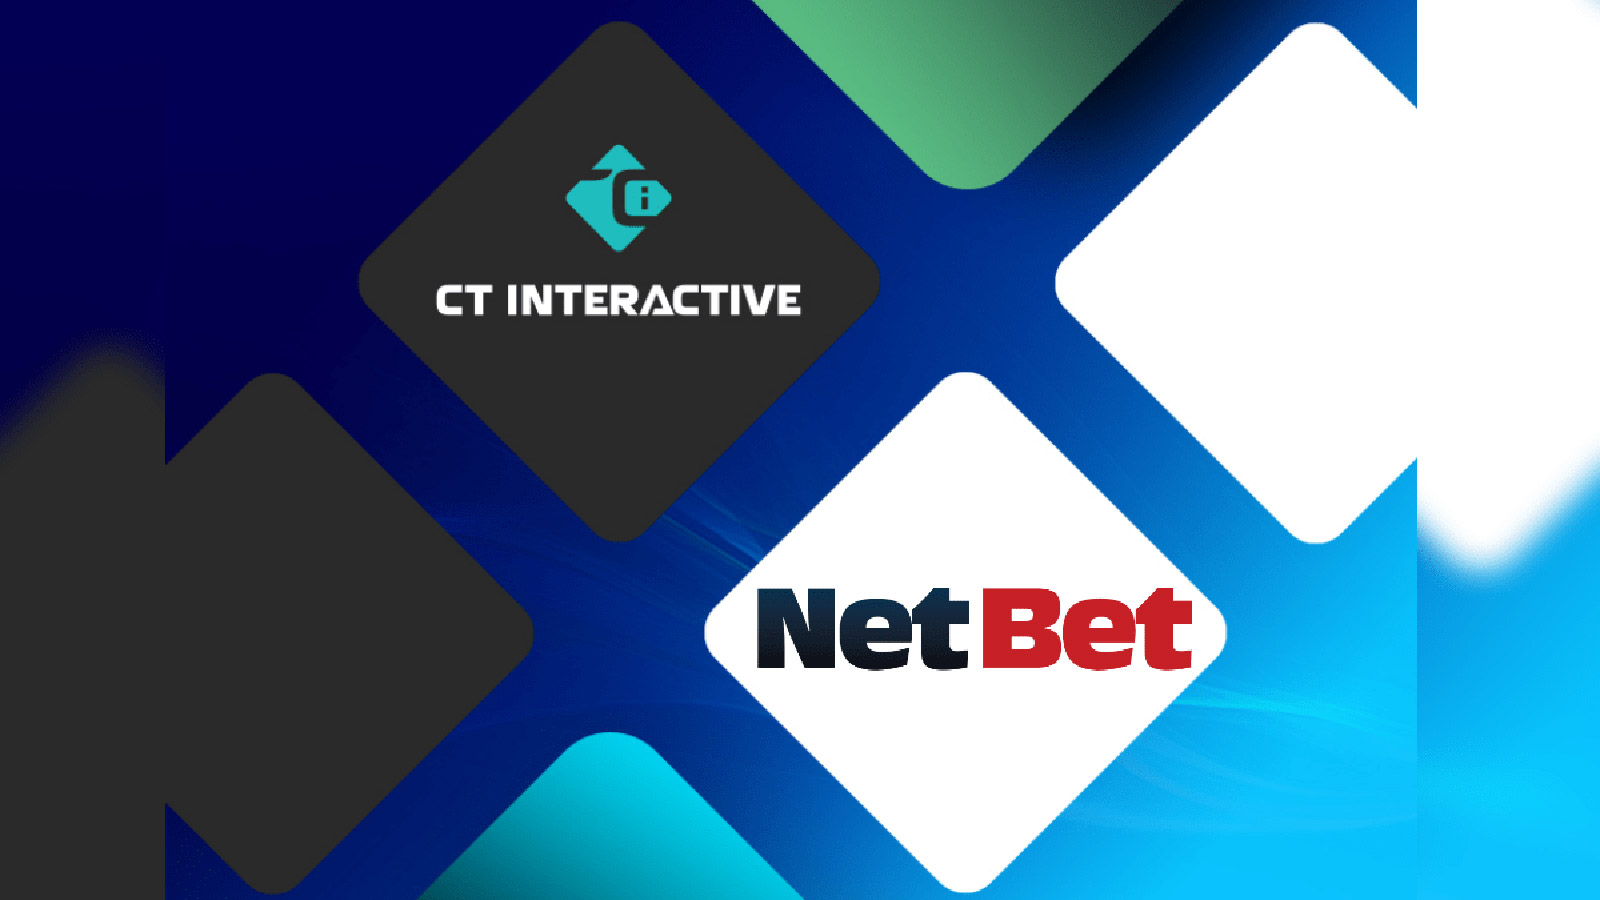 NetBet Italy's partnership with CT Interactive